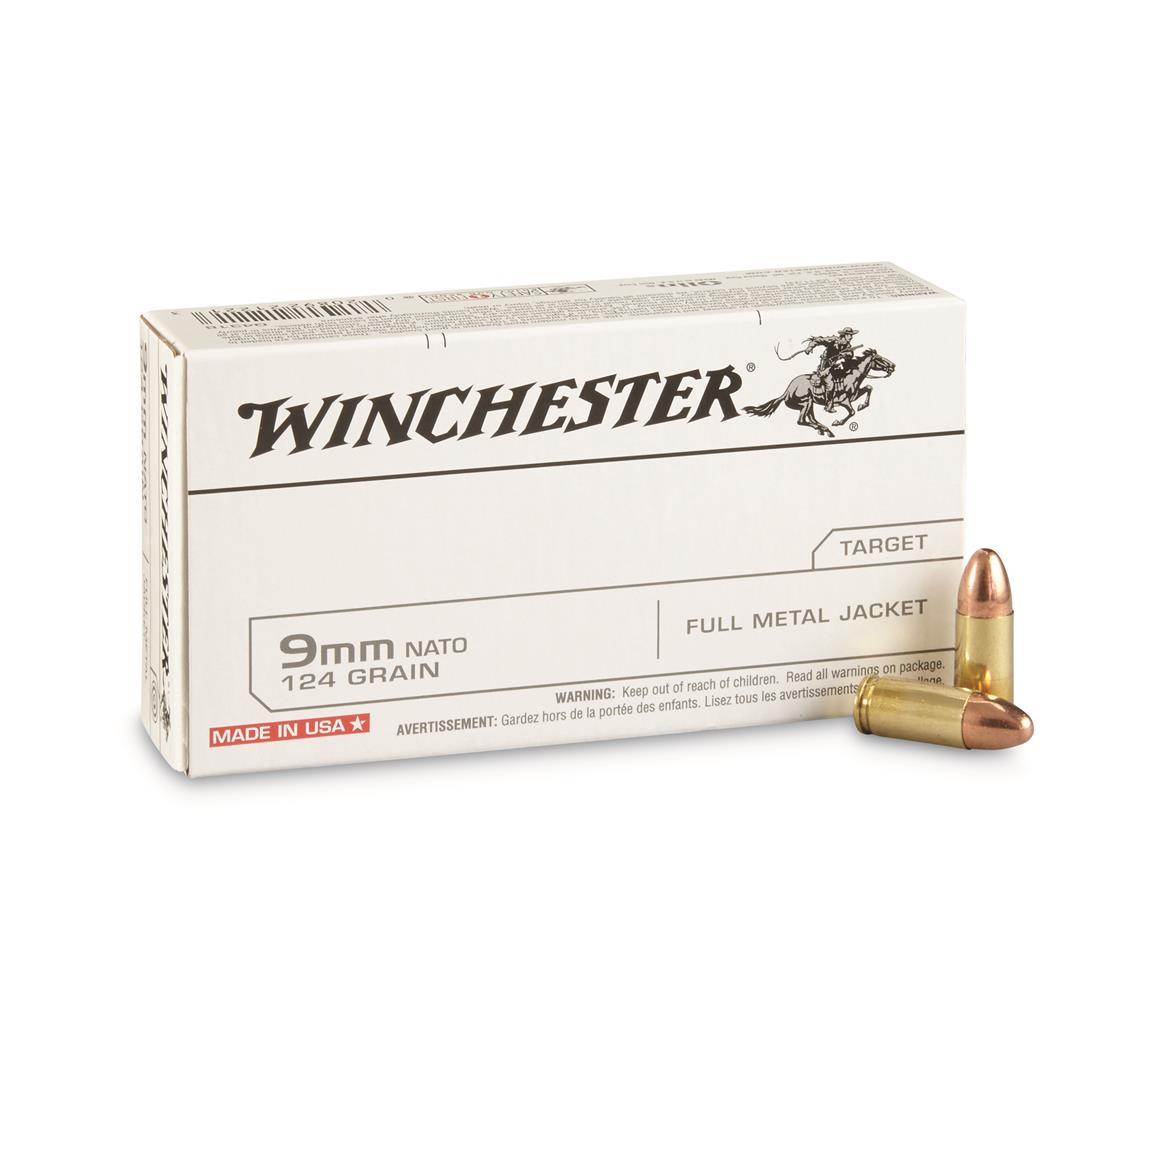 Winchester, 9mm Luger, FMJ, 124 Grain, 250 Rounds